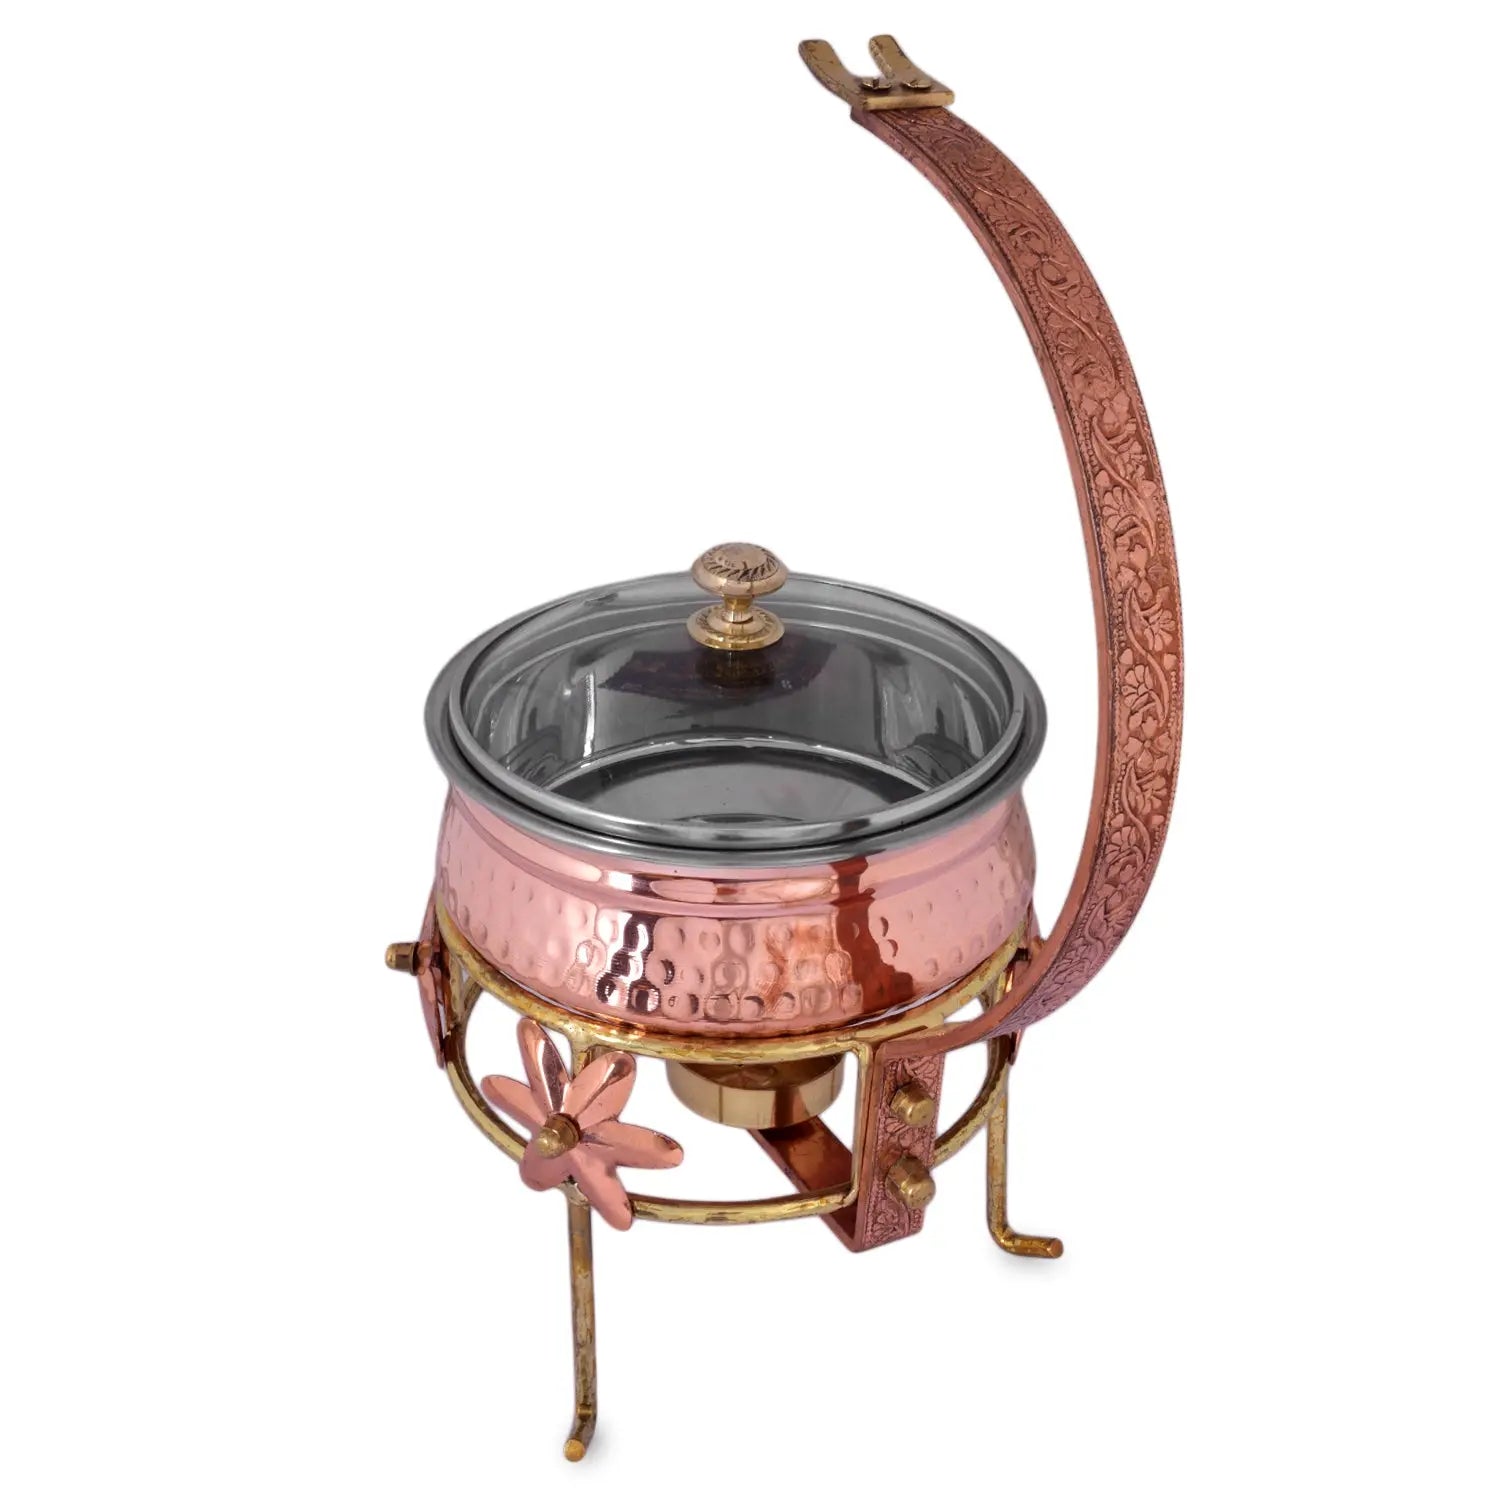 Crockery Wala And Company Copper Steel Hammered Chaffing Dish Copper Serveware With Lid & Brass Stand - CROCKERY WALA AND COMPANY 